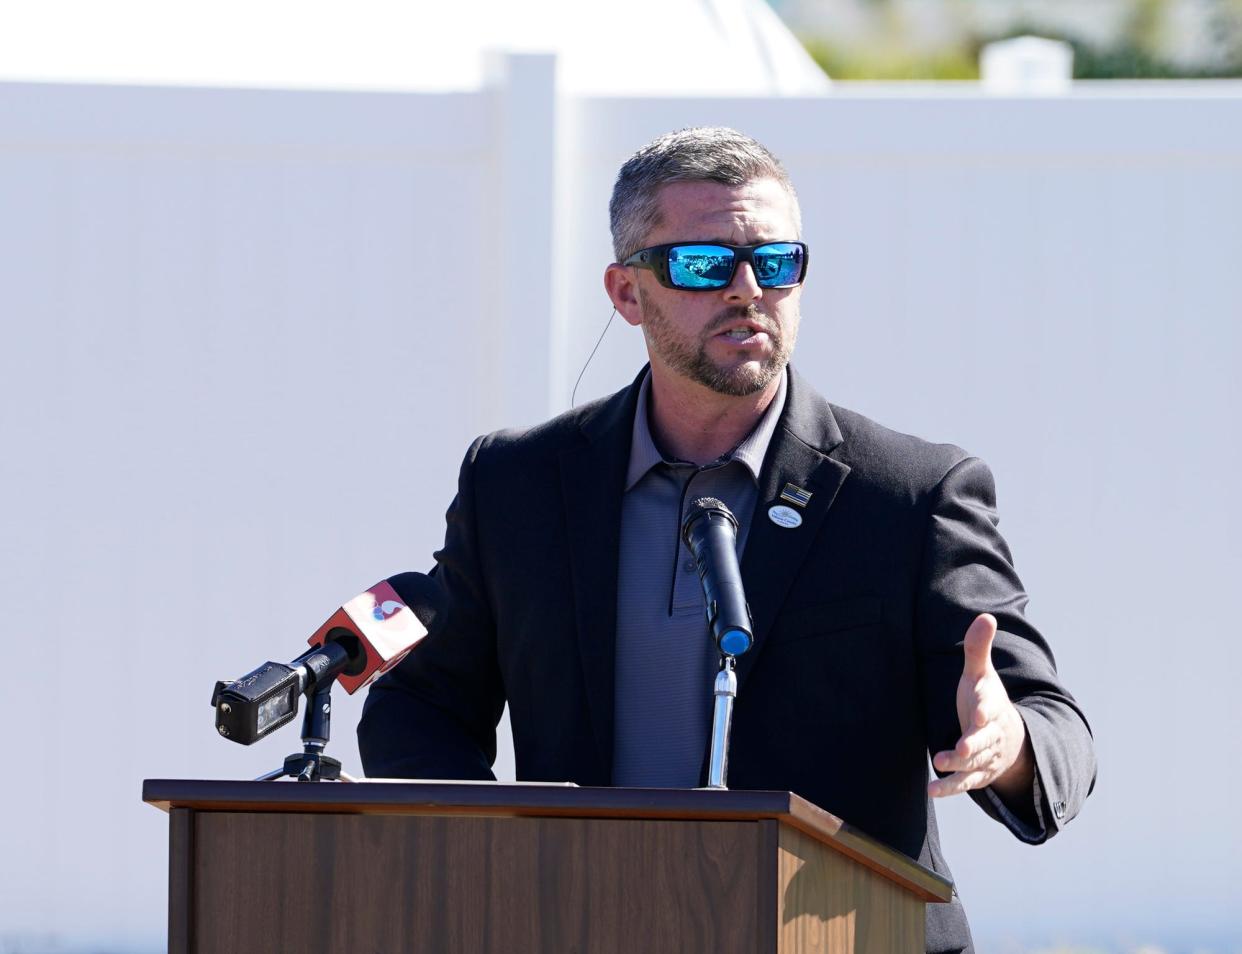 Volusia County Councilman Danny Robins, shown speaking at a septic-to-sewer project groundbreaking in Oak Hill in January, came within hours of being re-elected without opposition Friday, but Ted Noftall, a former candidate for Port Orange mayor, qualified as a candidate, making the Council District 3 seat a race.